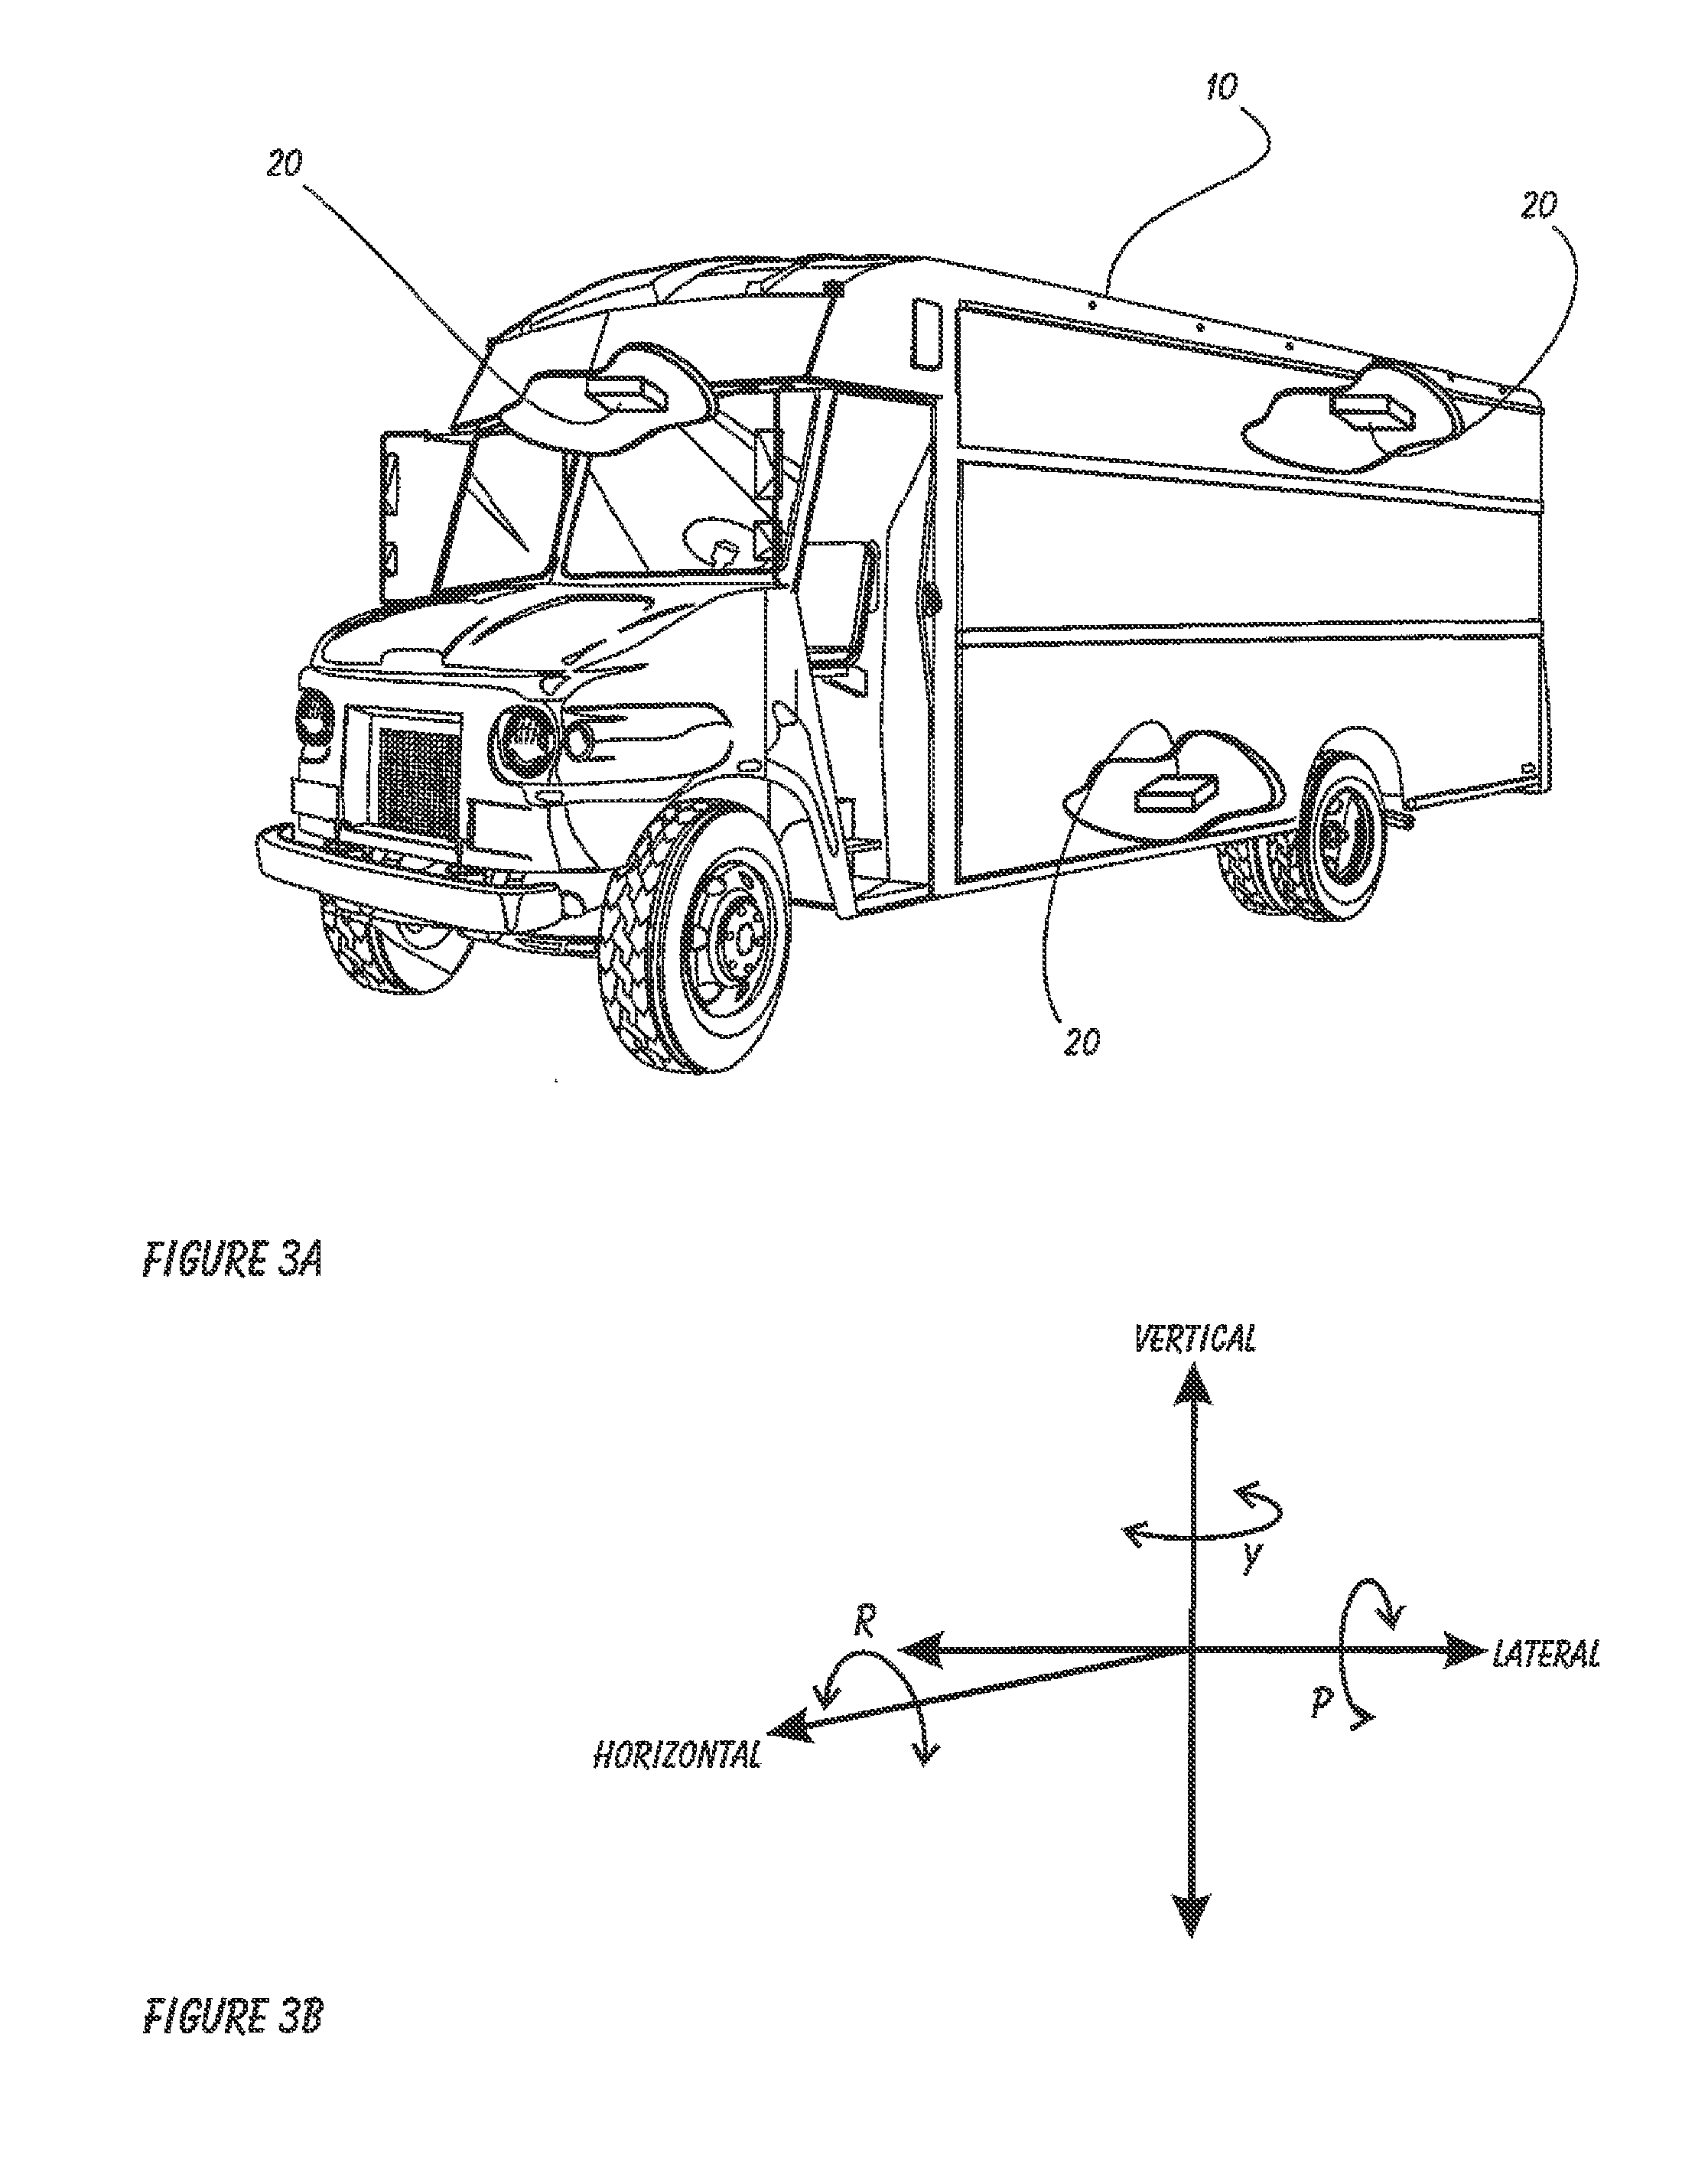 Method and system for tuning the effect of vehicle characteristics on risk prediction